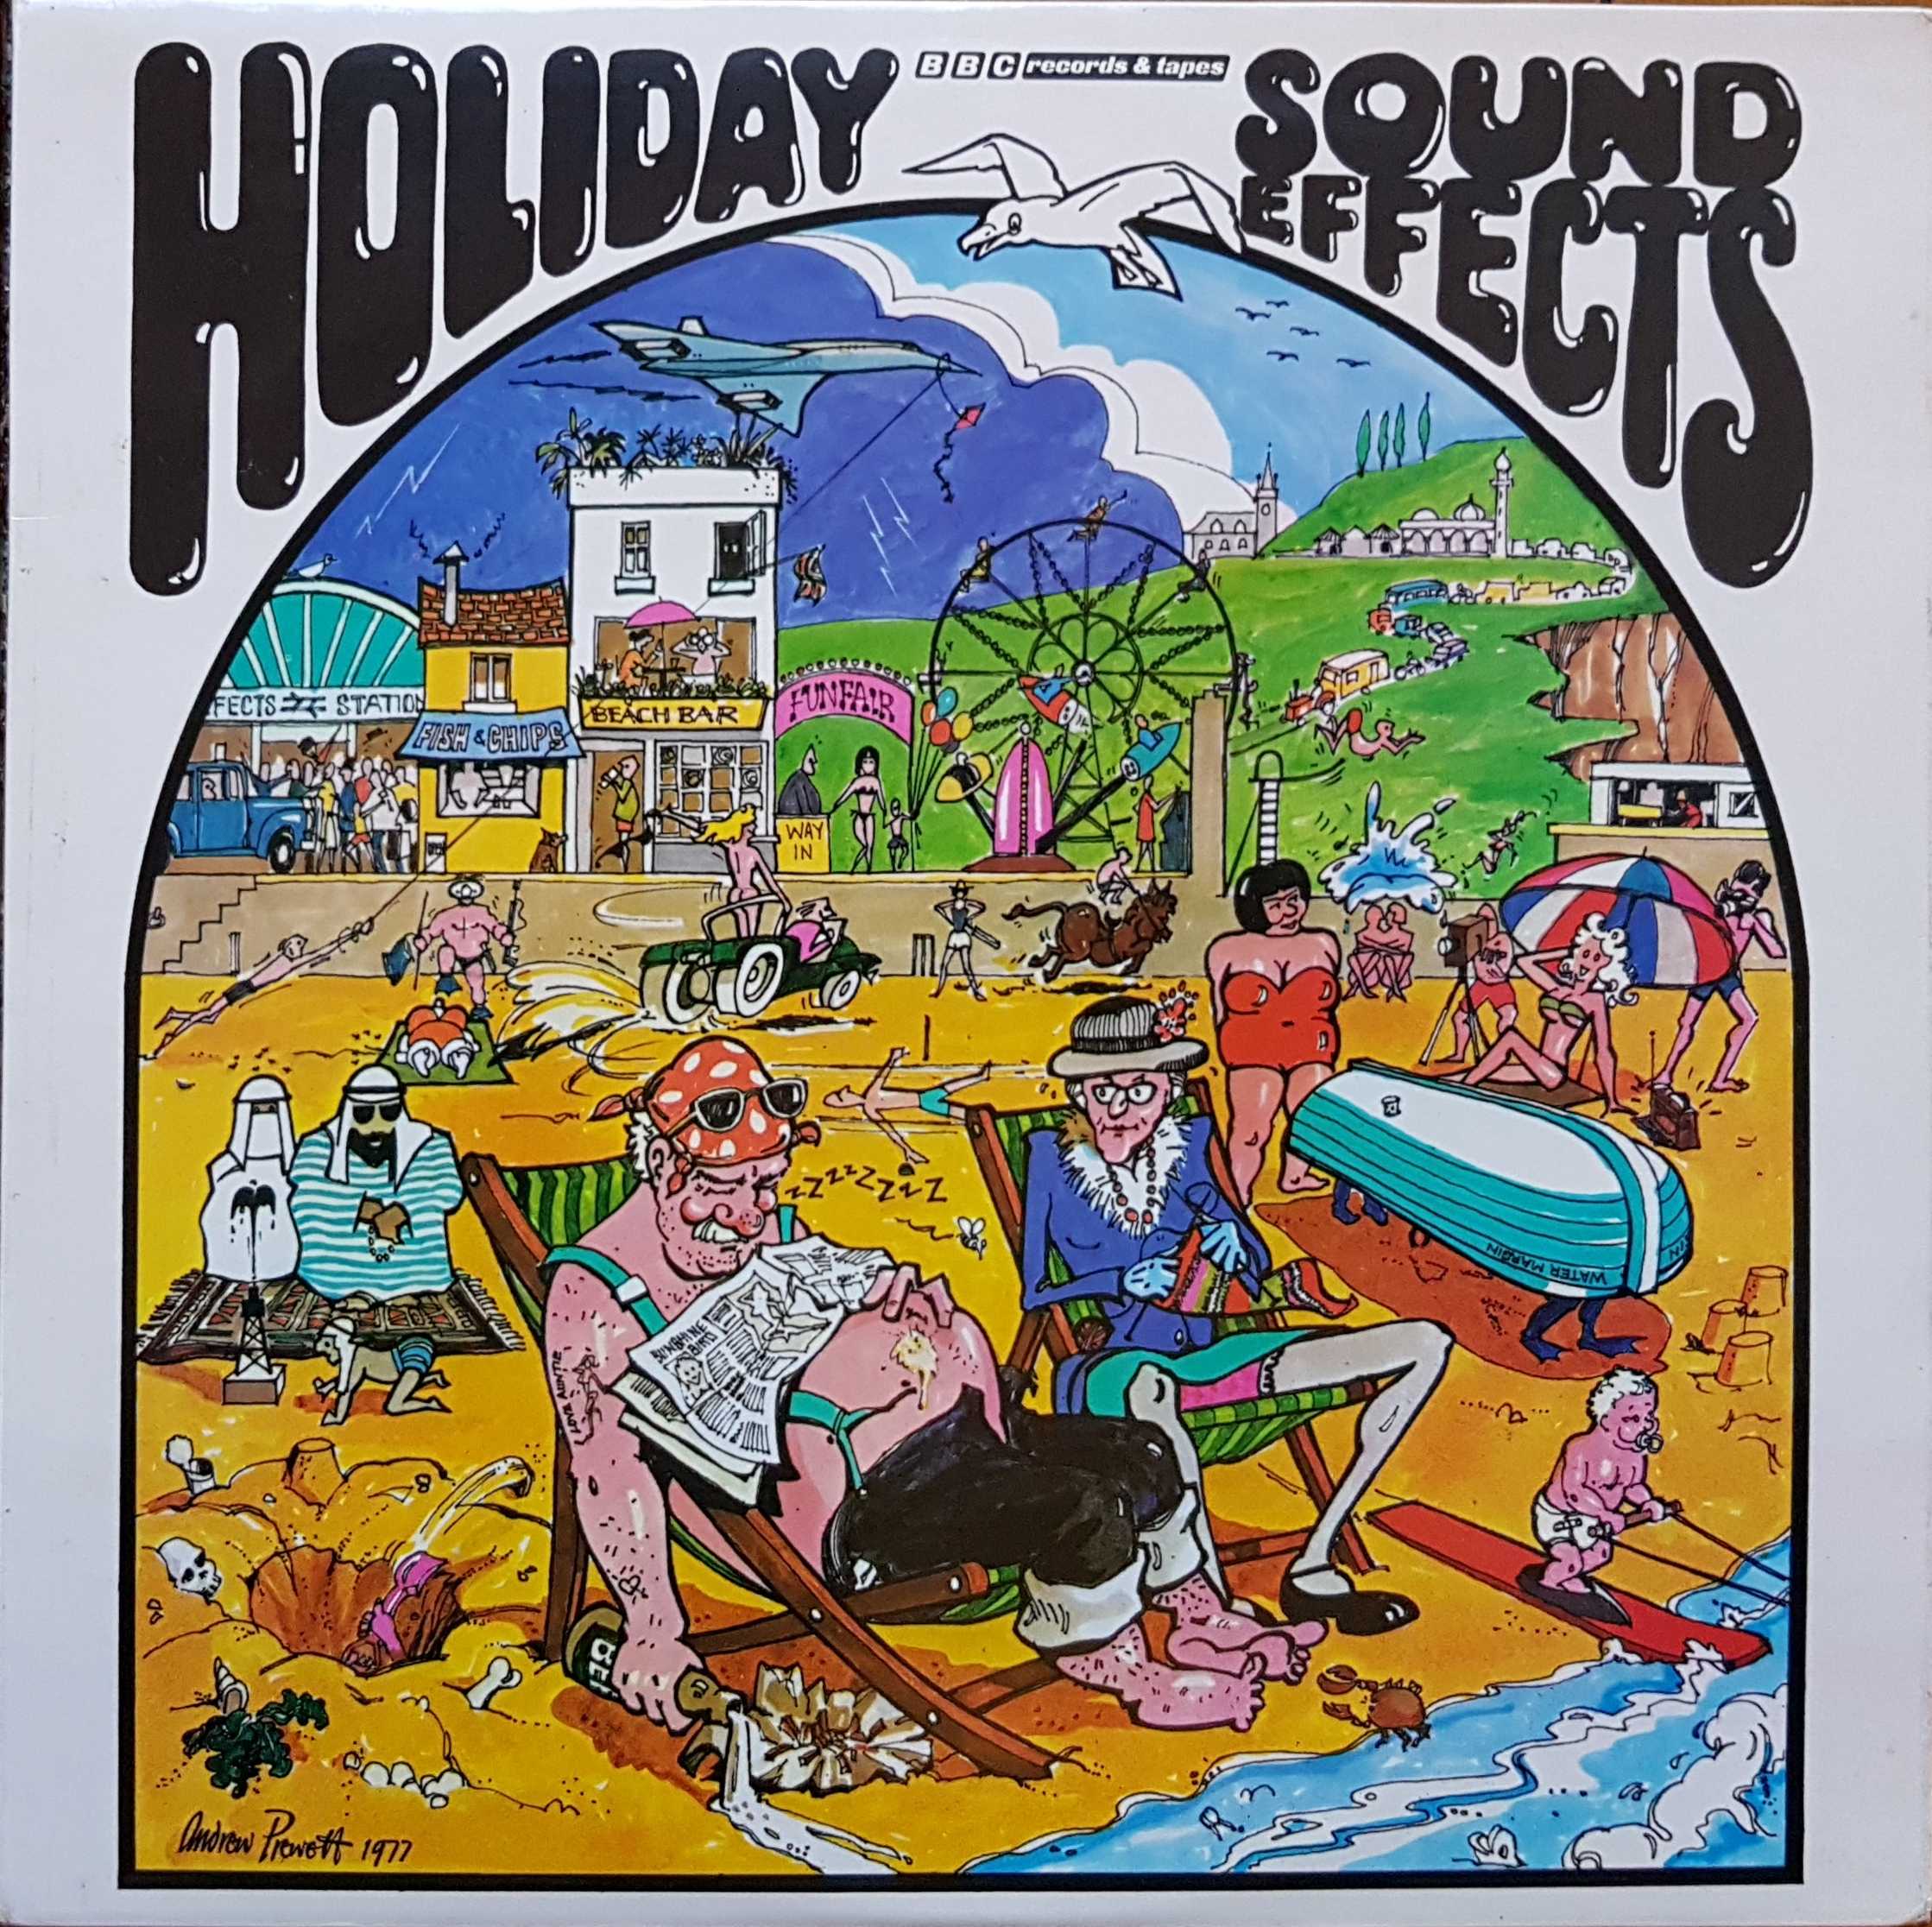 Picture of REC 301 Holiday sound effects (No. 18) by artist Various from the BBC albums - Records and Tapes library